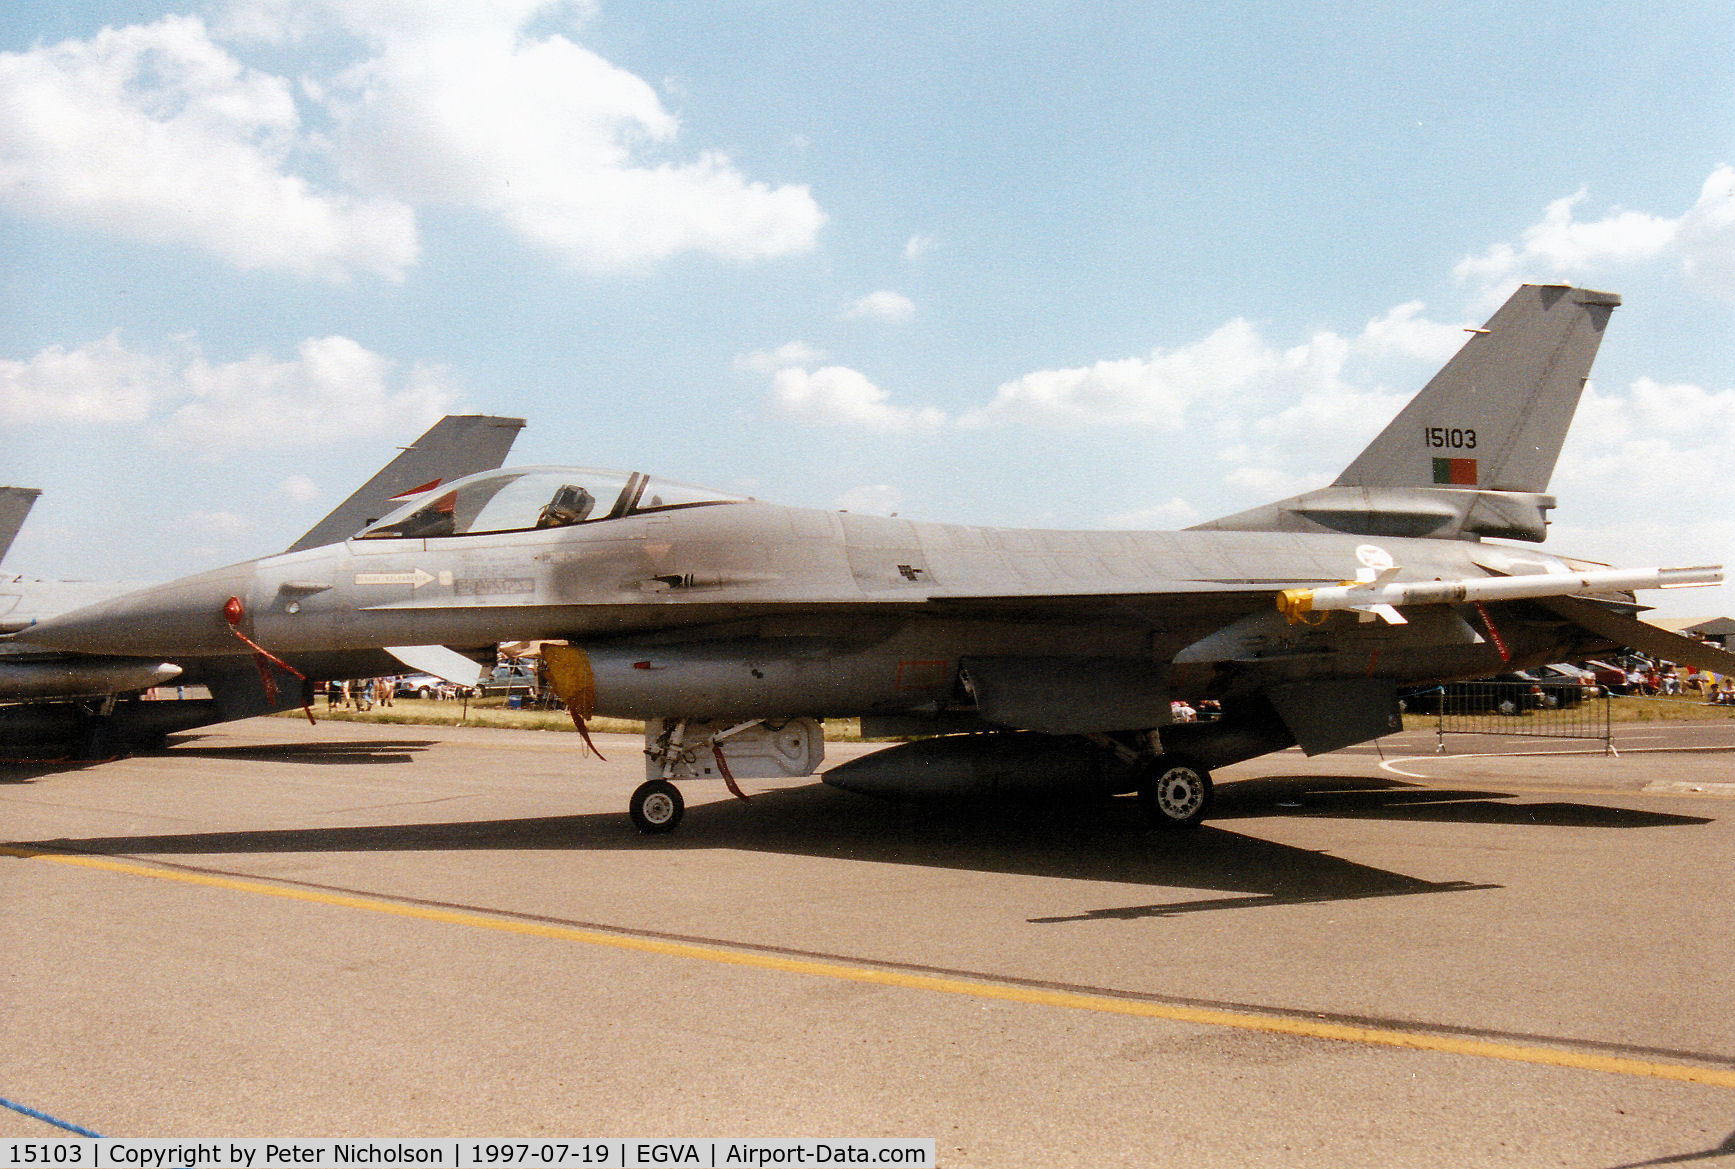 15103, 1993 Lockheed F-16AM Fighting Falcon C/N AA-3, F-16A Falcon, callsign Portuguese Air Force 2474, of 201 Esquadron on display at the 1997 Intnl Air Tattoo at RAF Fairford.